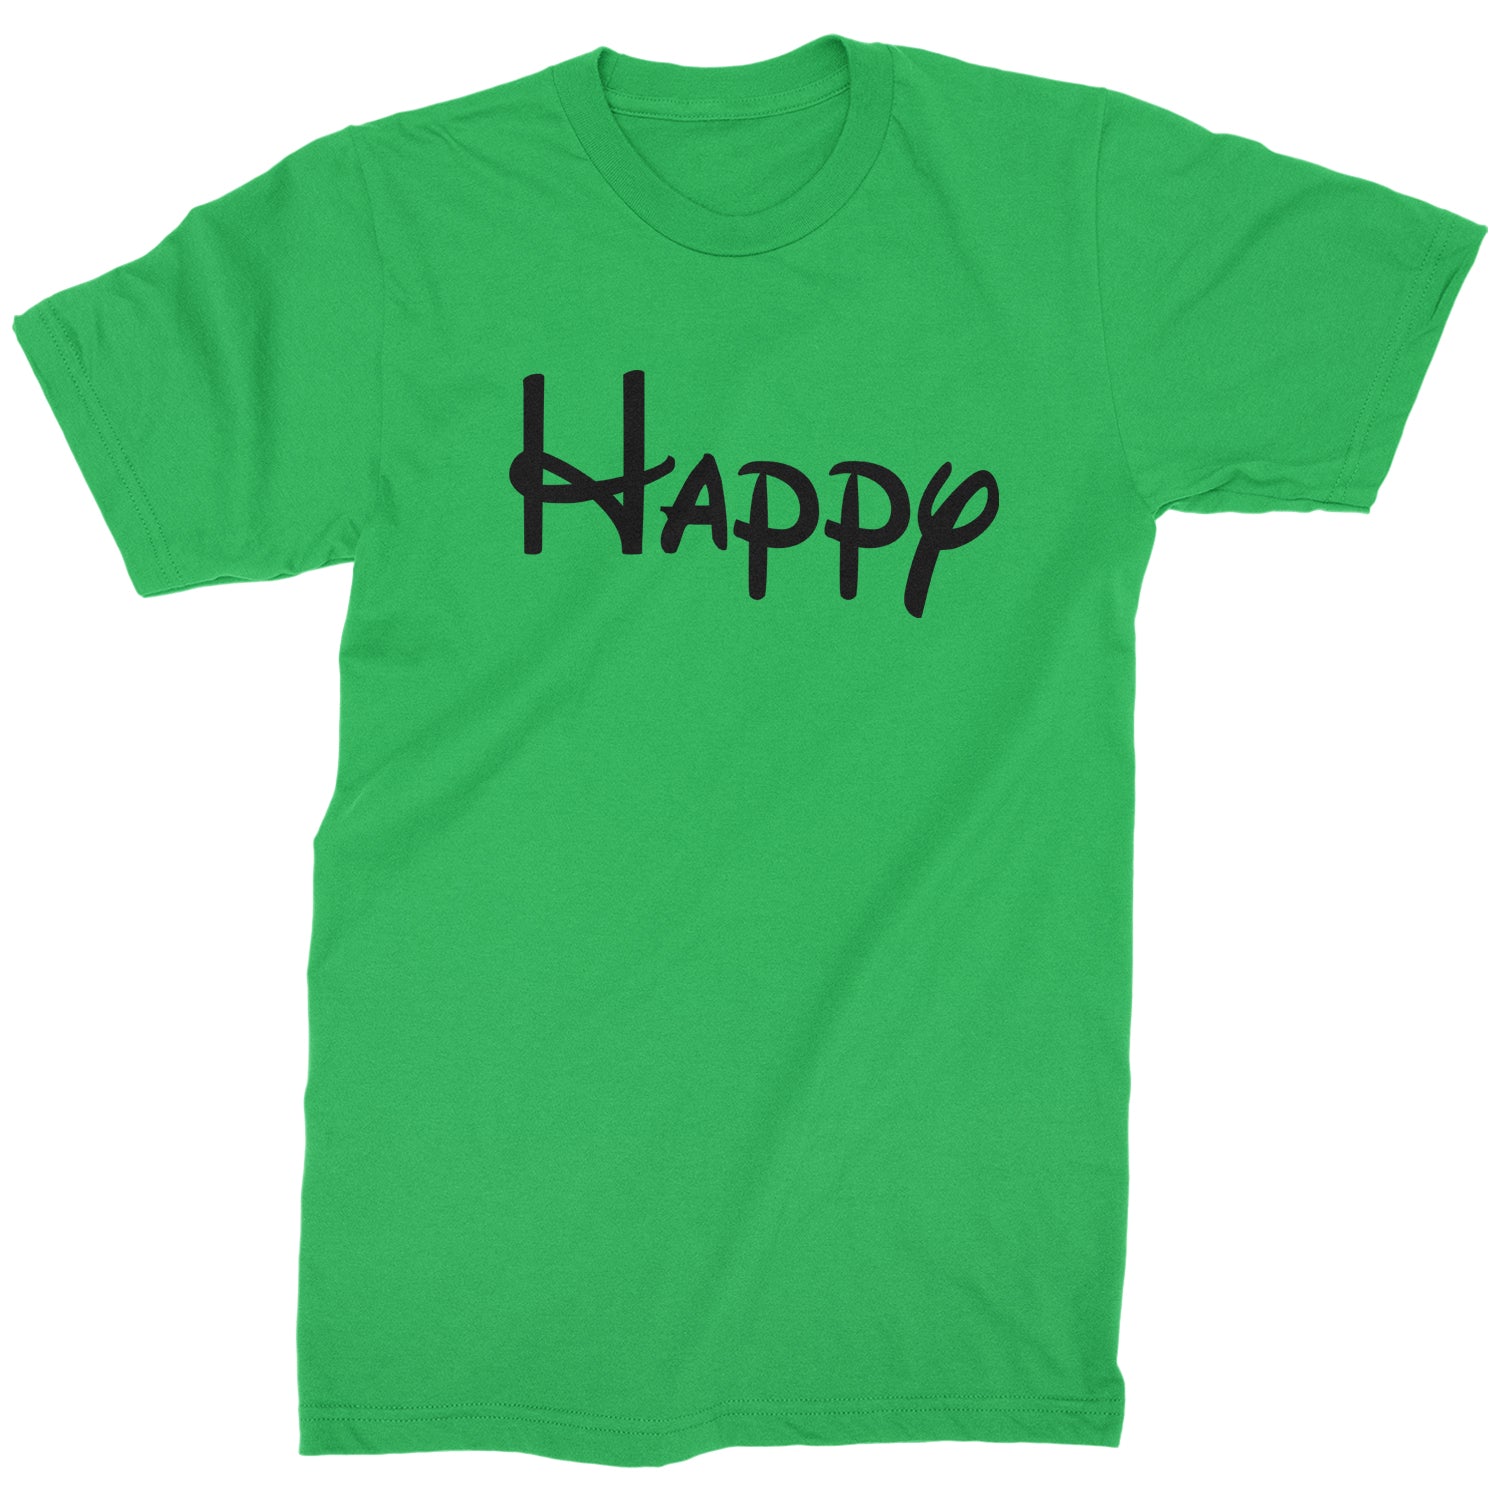 Happy - 7 Dwarfs Costume Mens T-shirt and, costume, dwarfs, group, halloween, matching, seven, snow, the, white by Expression Tees